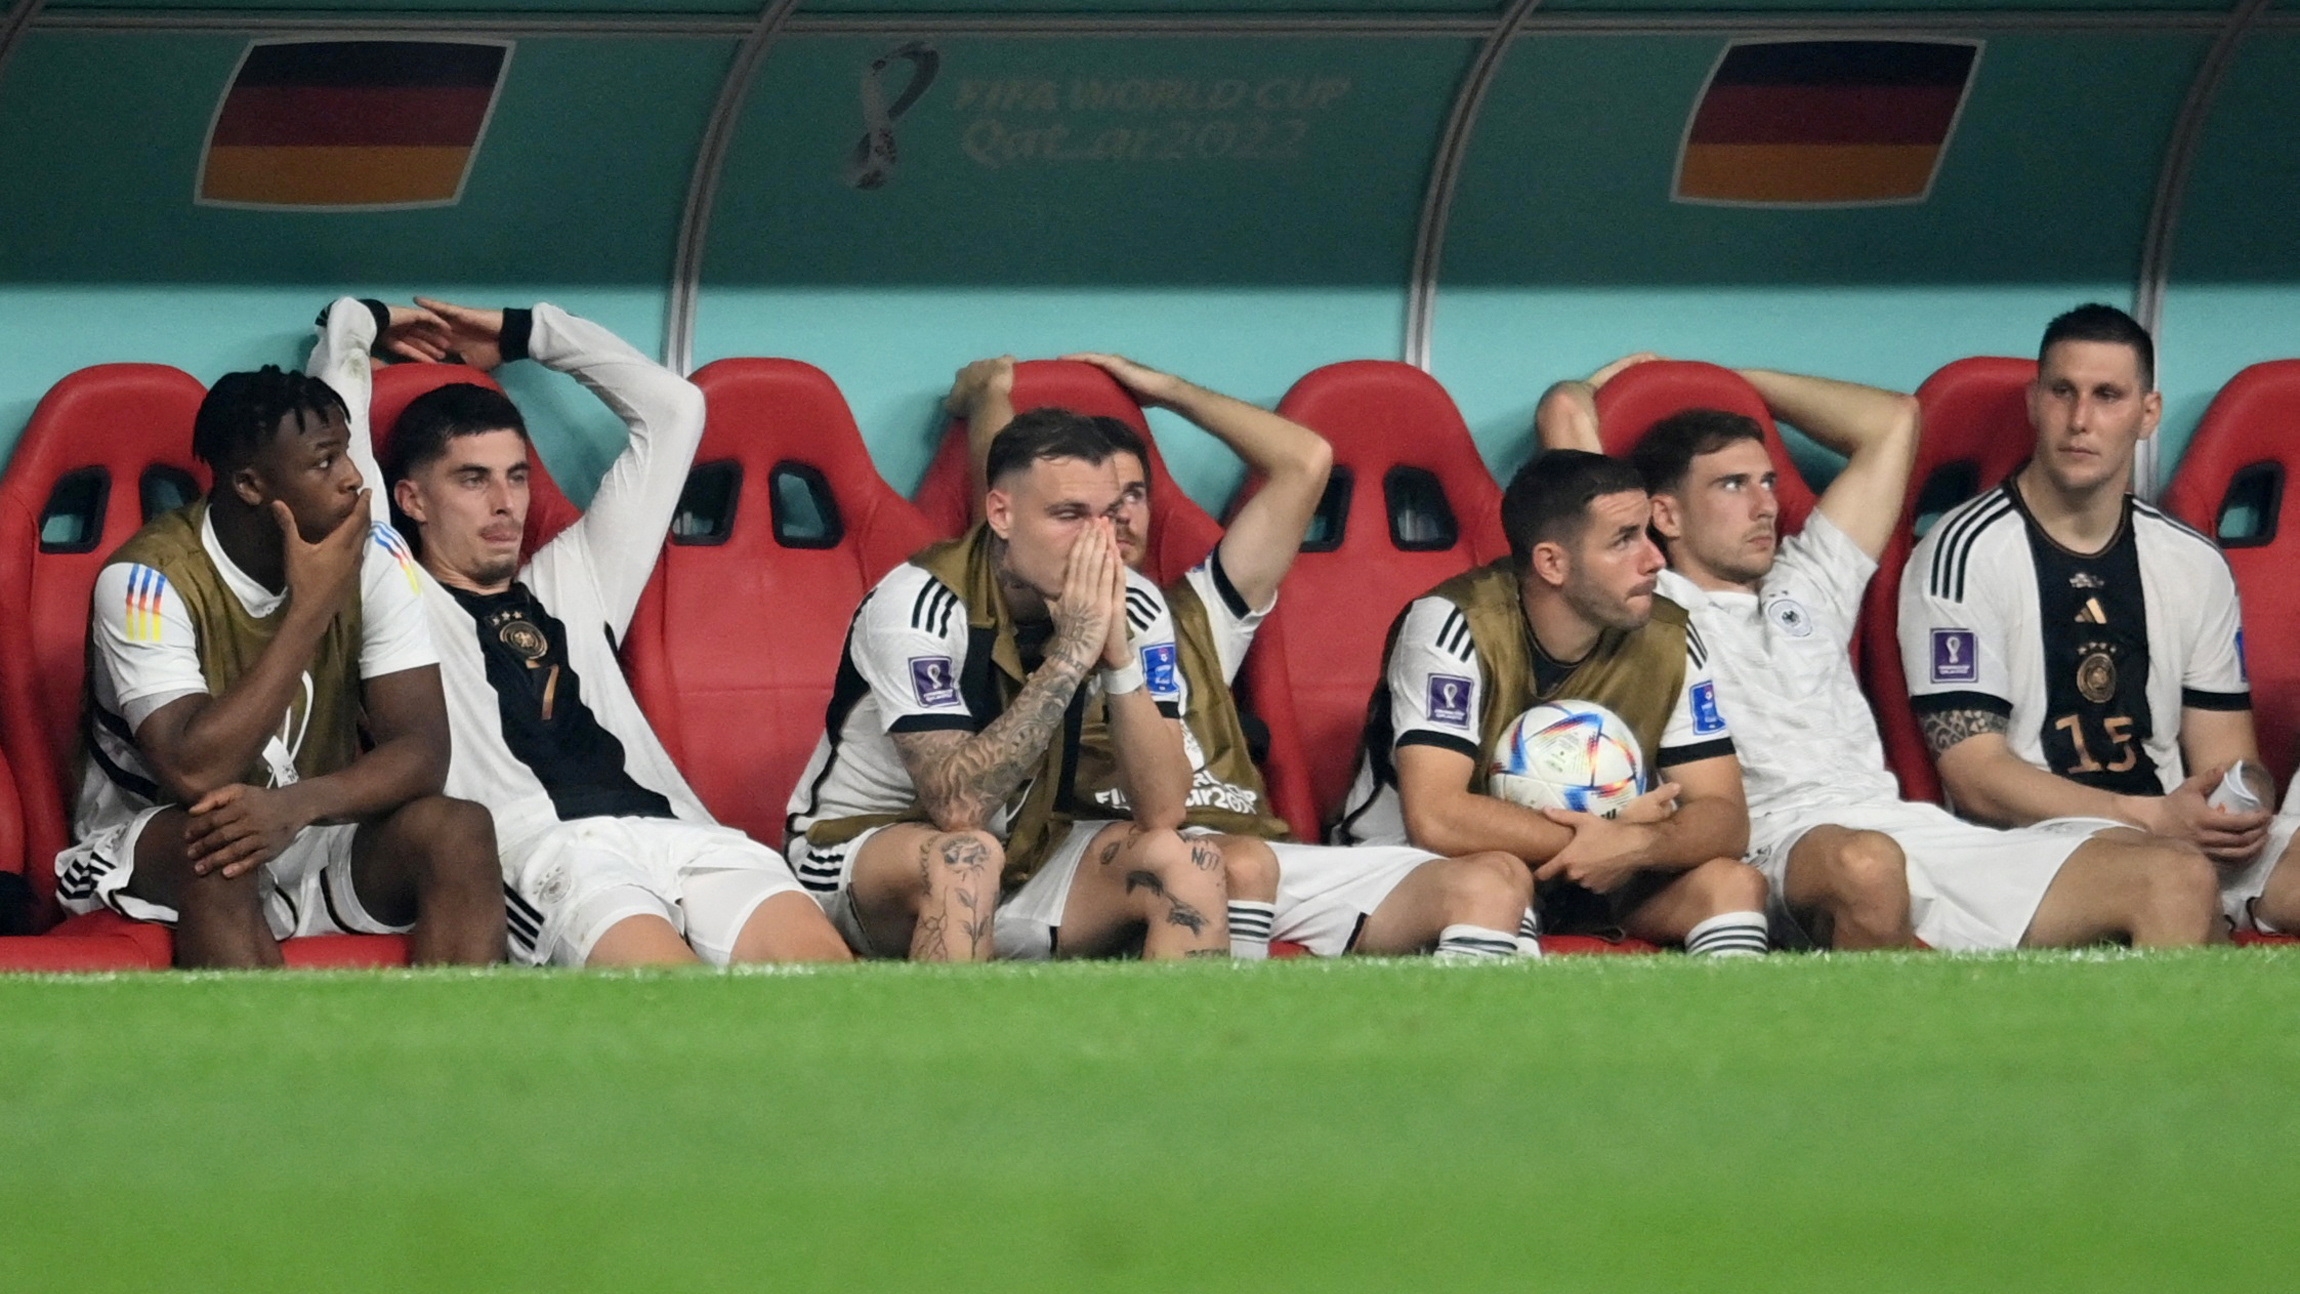 Soccer Football - FIFA World Cup Qatar 2022 - Group E - Costa Rica v Germany - Al Bayt Stadium, Al Khor, Qatar - December 1, 2022 Germany players look dejected after the match as Germany are eliminated from the World Cup REUTERS/Annegret Hilse     TPX IMAGES OF THE DAY